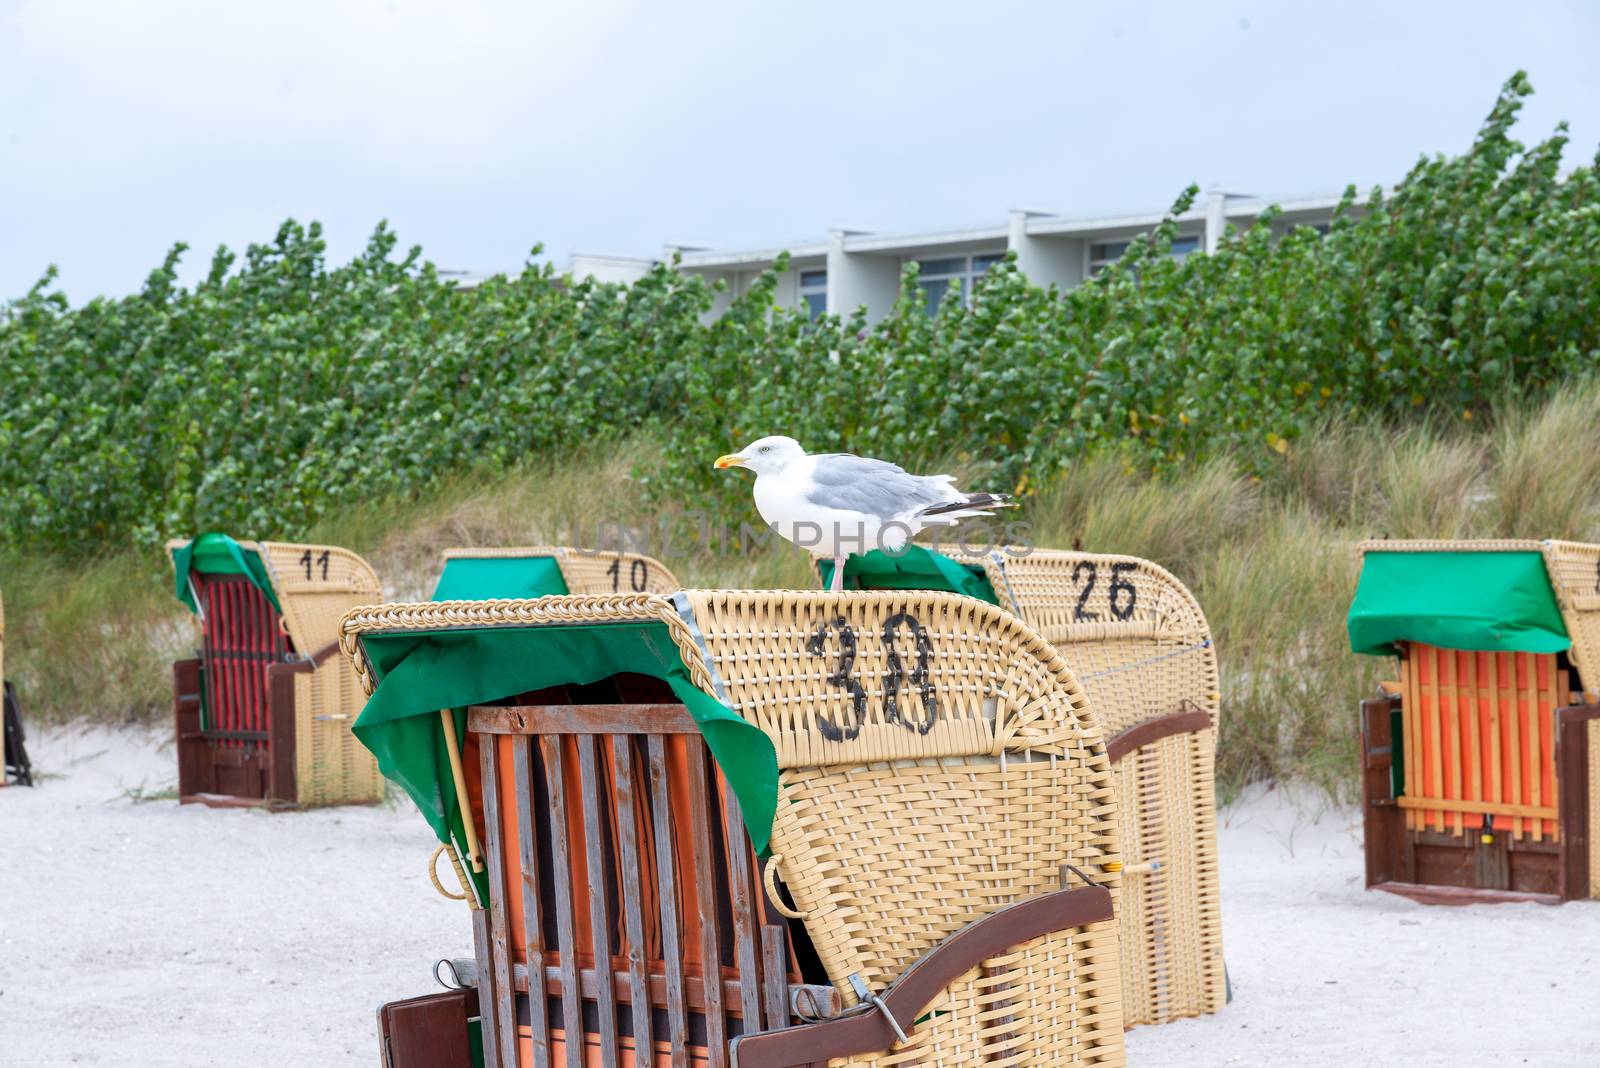 Fehmarn, Schleswig-Holstein/Germany - 03.09.2019: A seagull rests on one of several empty beach chairs on a windy day at the beach.